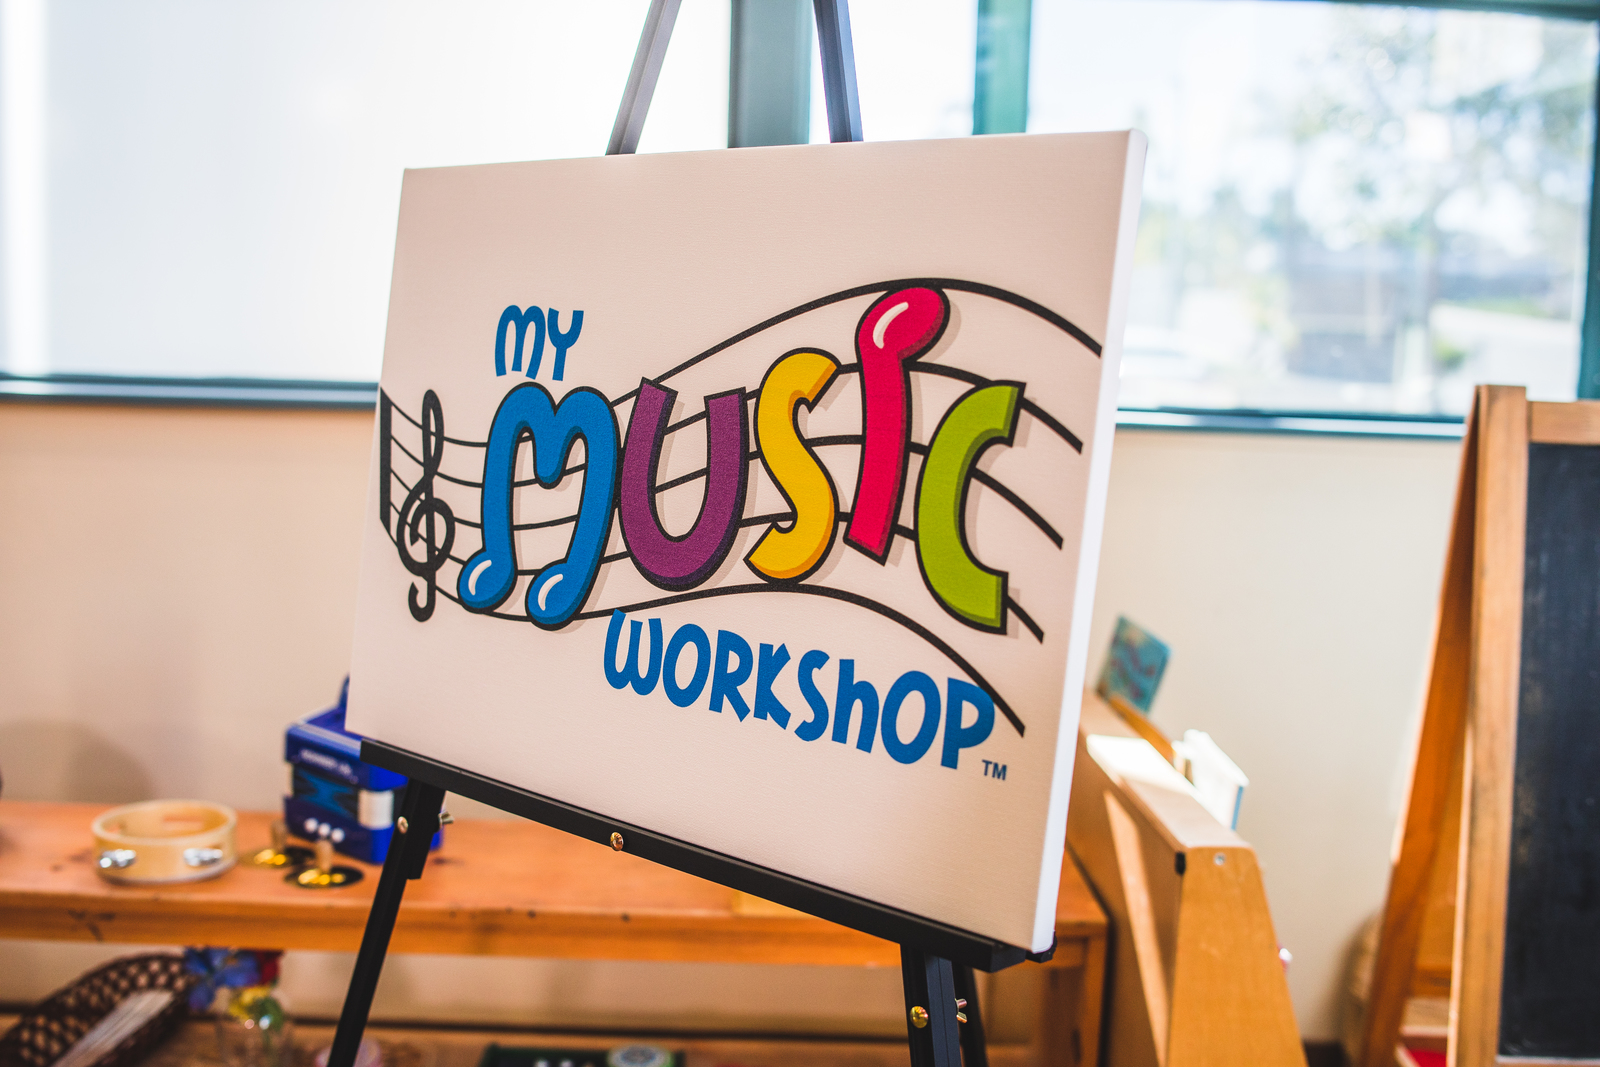 My Music Workshop Logo on Posterboard